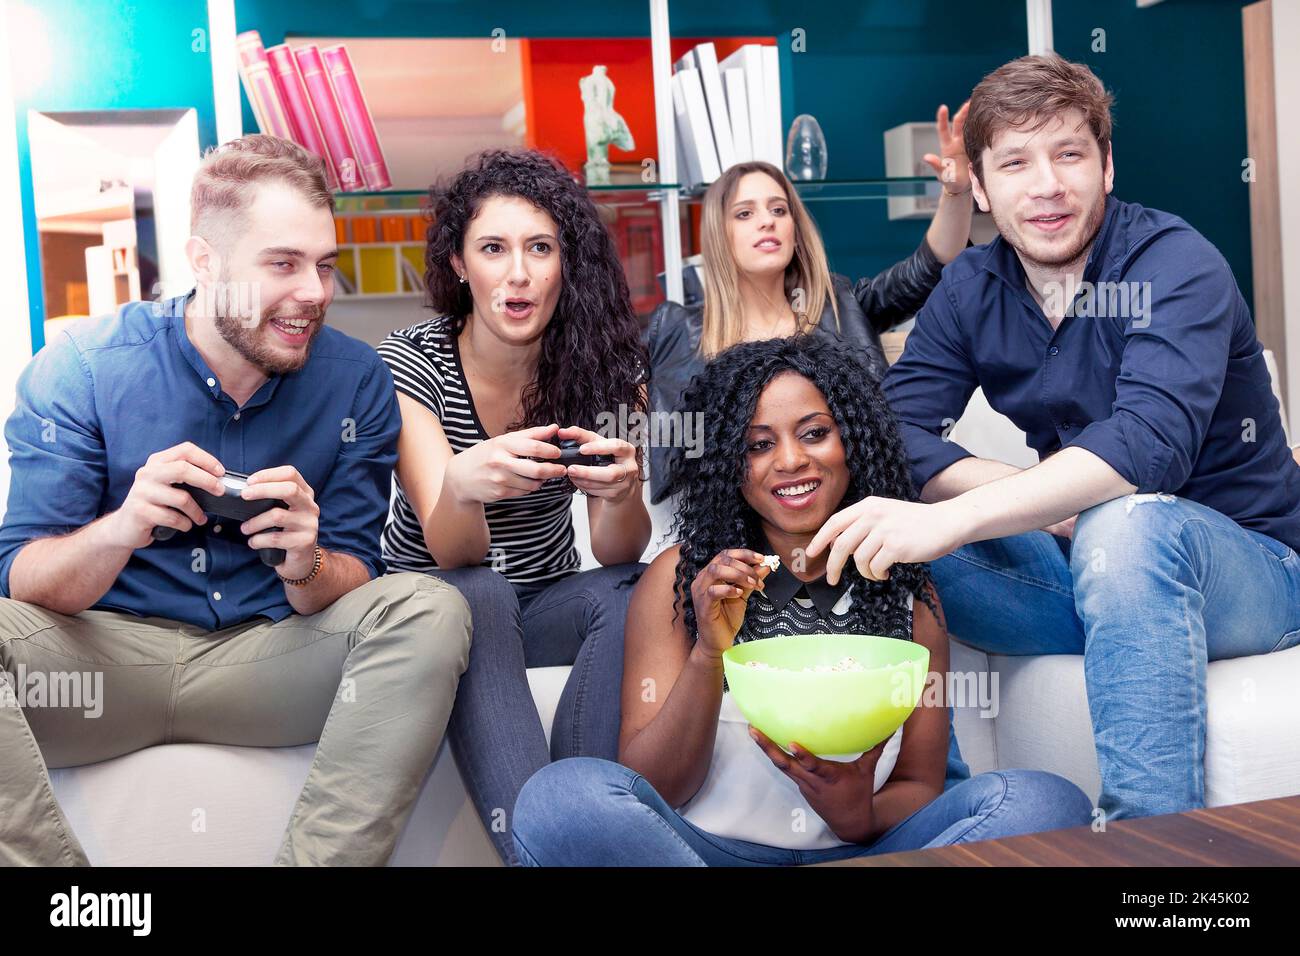 group of people having fun on the couch playing with the joystick Stock Photo